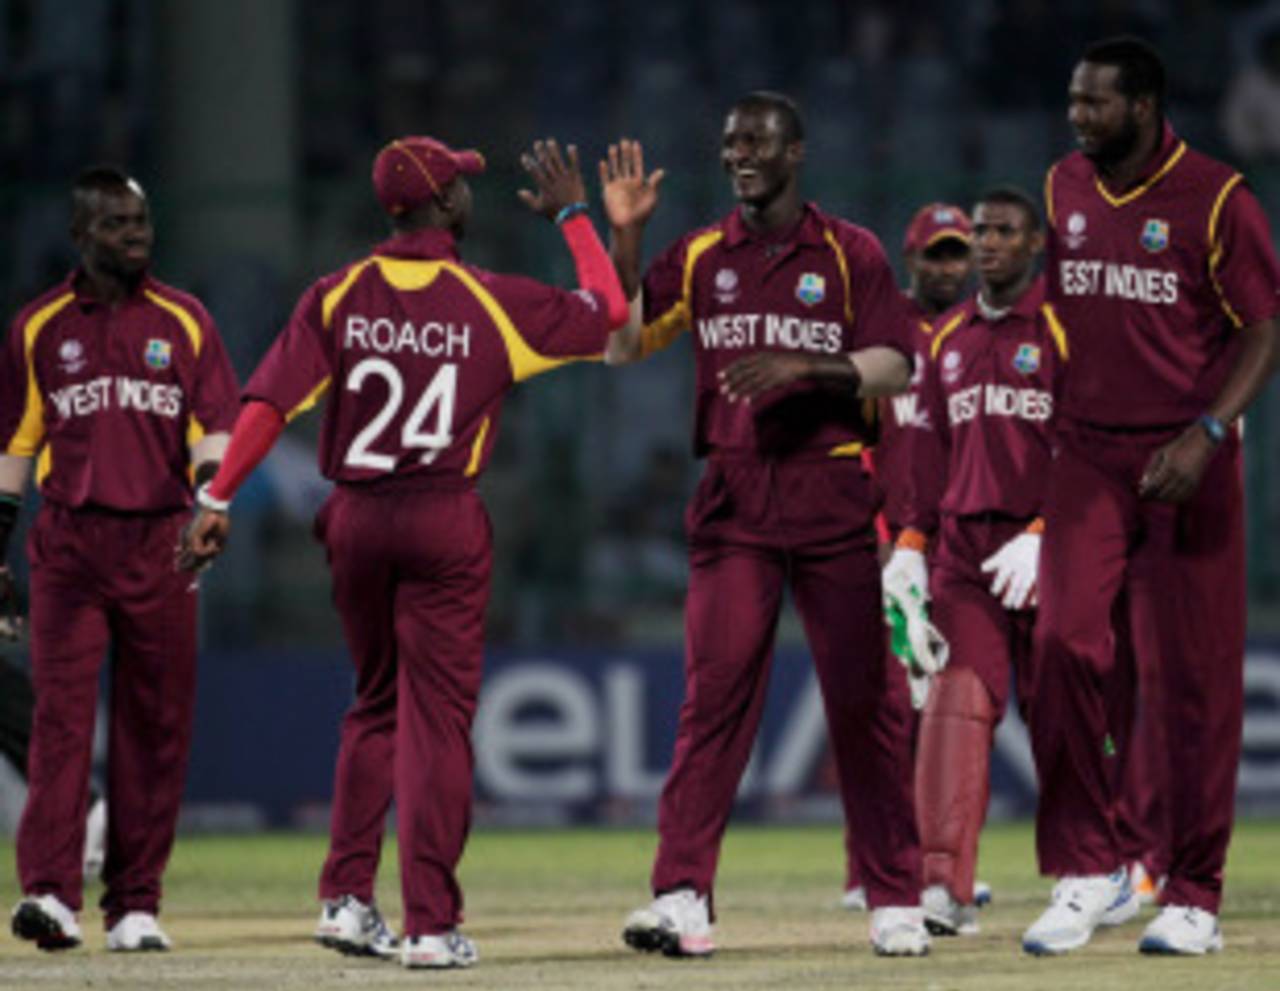 Kemar Roach celebrates his six-wicket haul, Netherlands v West Indies, Group B, World Cup 2011, Delhi, February 28, 2011